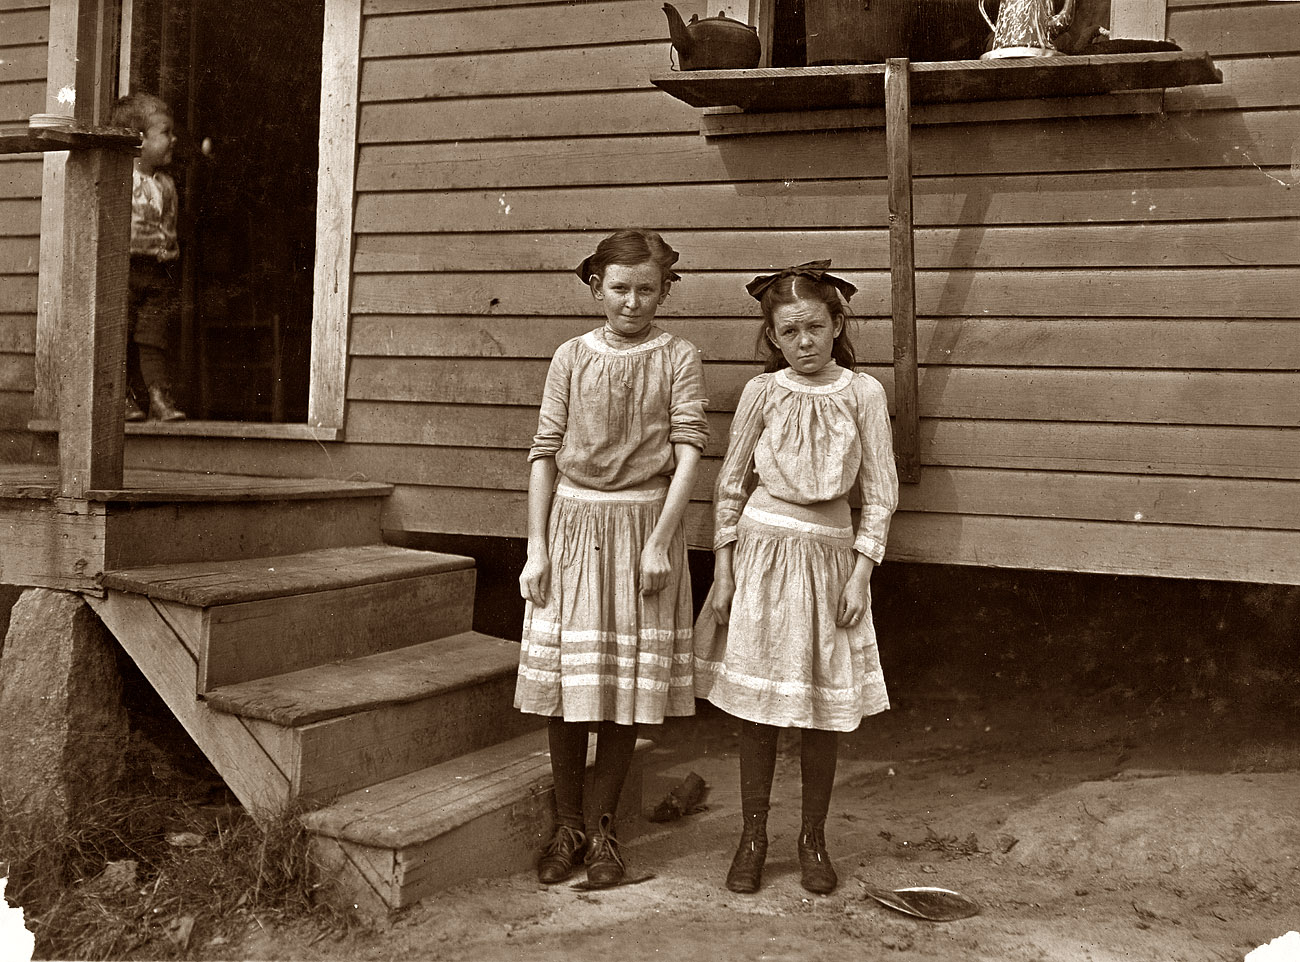 November 1908: Gastonia, North Carolina. Lacy, 12 years old, and Savannah, 11. Have worked two years. Father said "The little one is a crackerjack on spinnin', at least so the boss says. She ain't satisfied unless in the mill. The oldest one isn't so good at it. Not as quick." (Note the tense, serious looks on the younger. Older one more like a real girl.) View full size. Photo and caption by Lewis Wickes Hine.